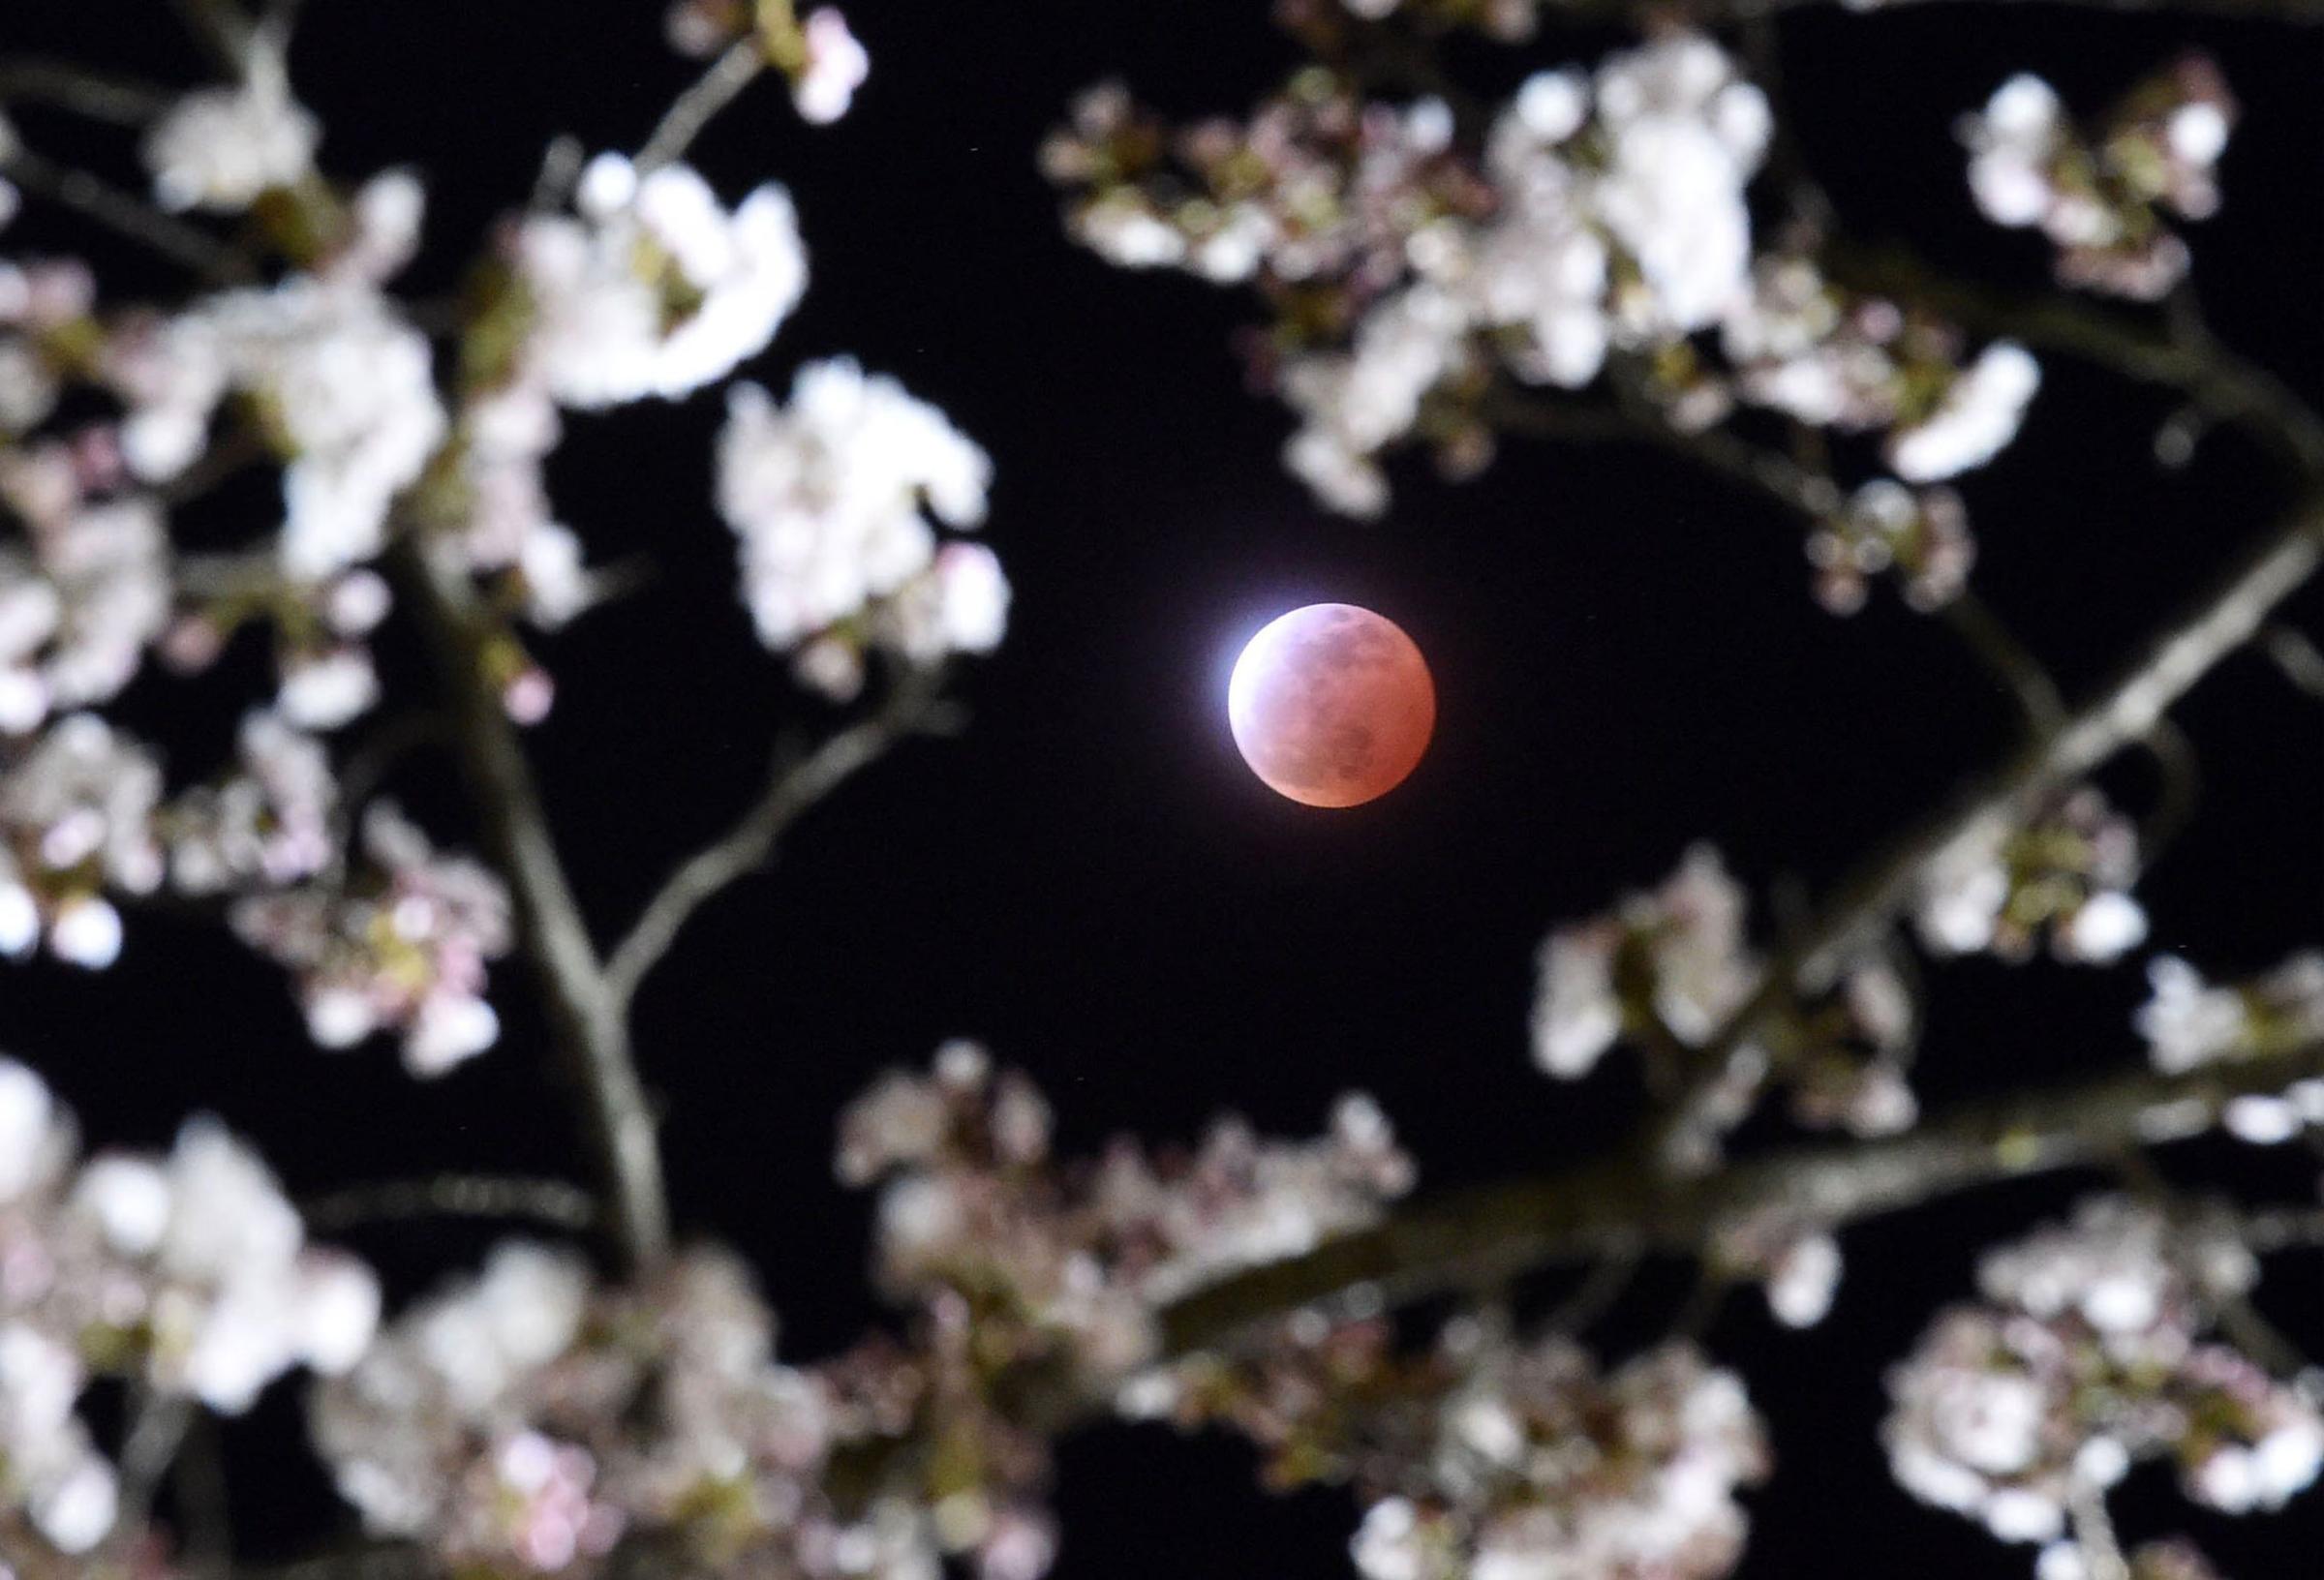 The eclipse above cherry blossoms in Shiraishi city, Miyagi prefecture, Japan on April 4, 2015.